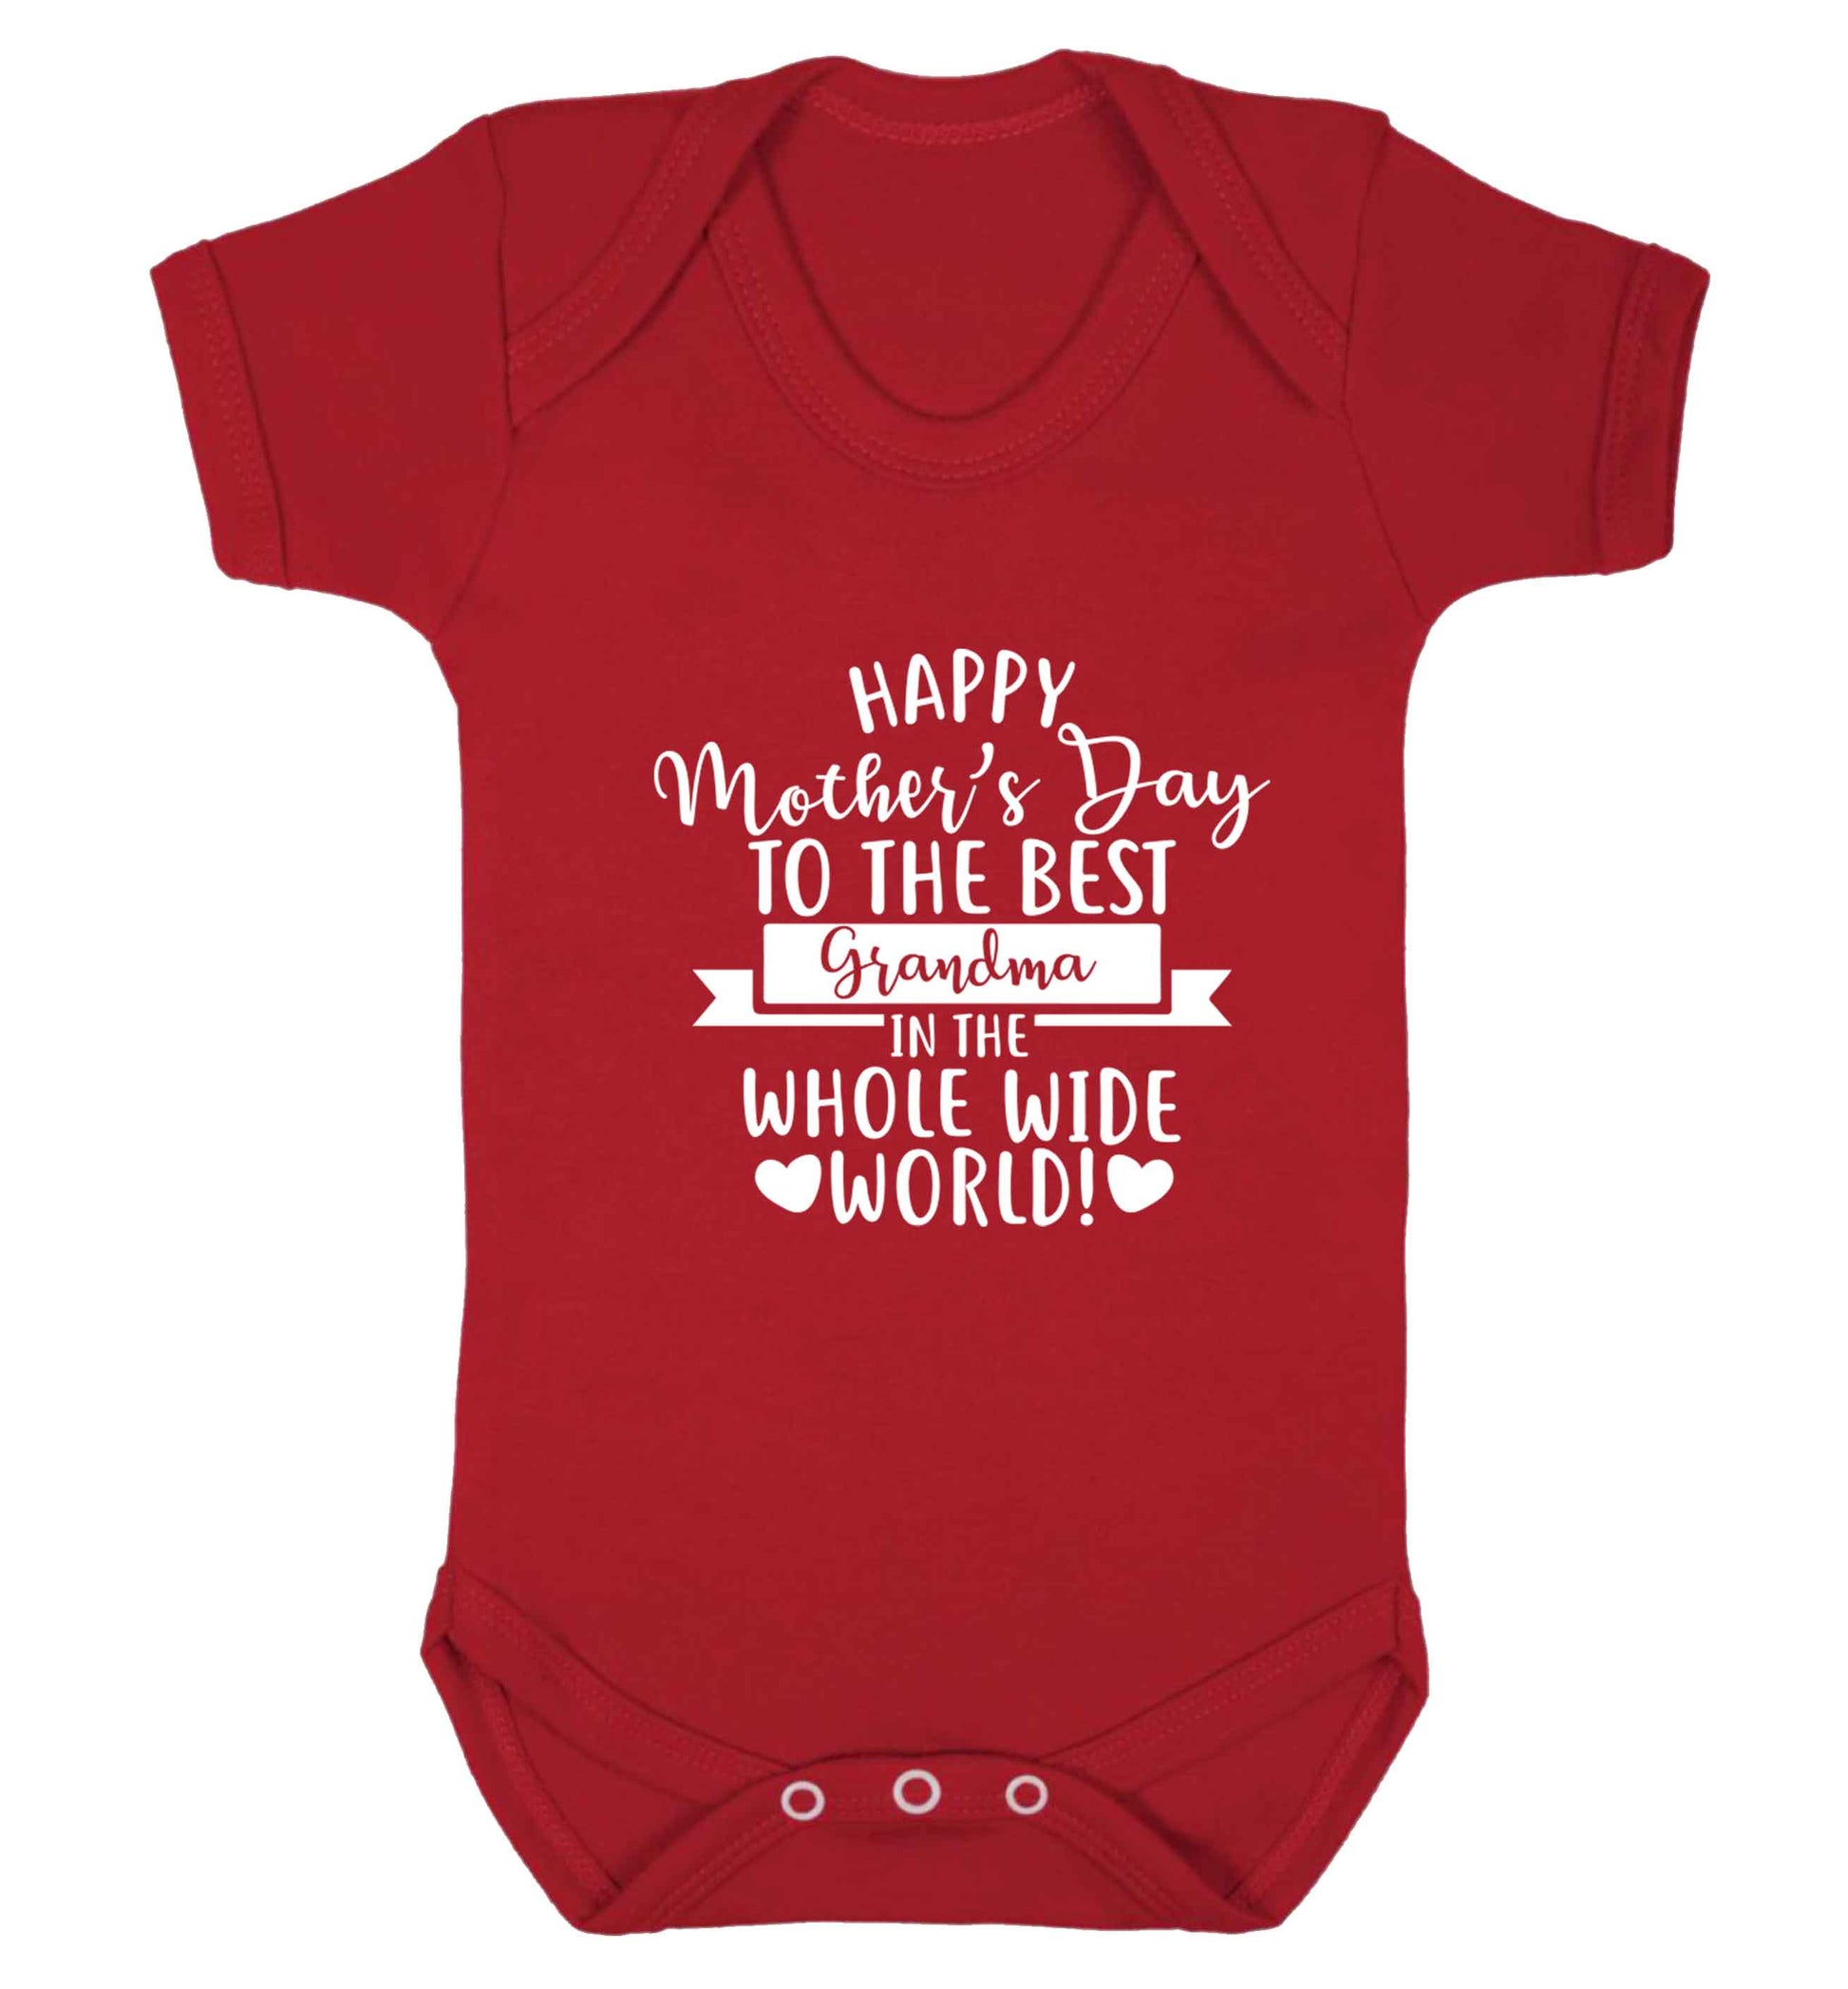 Happy mother's day to the best grandma in the world baby vest red 18-24 months